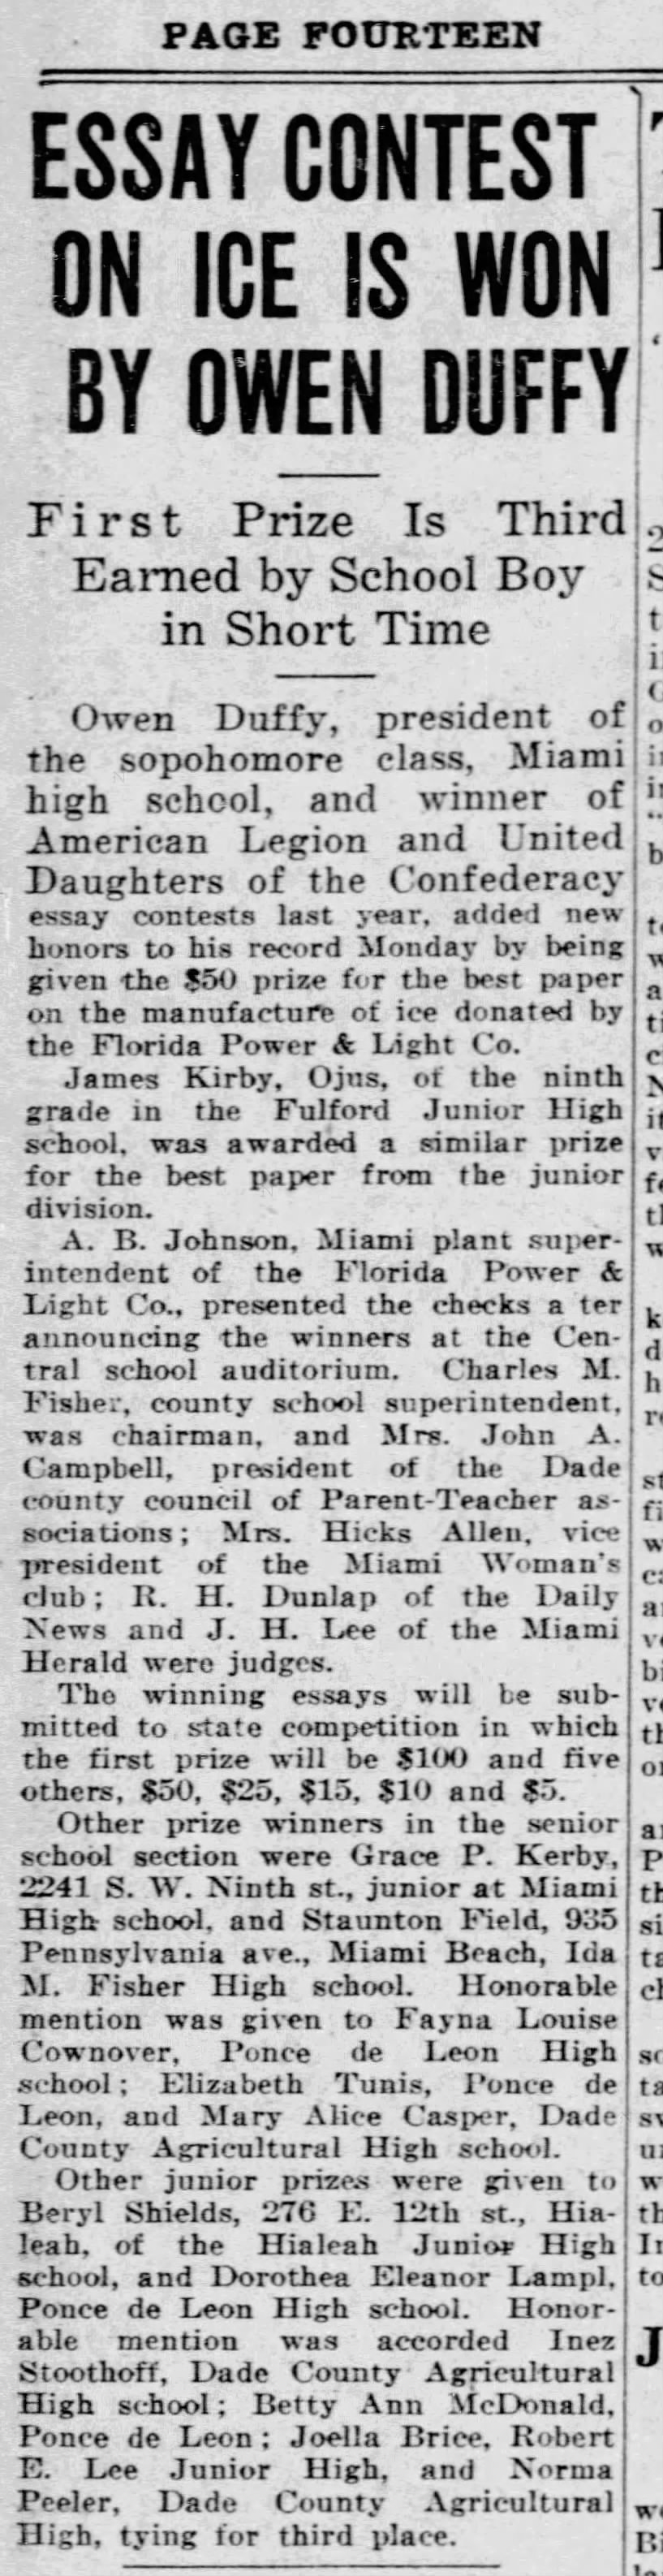 24 april 1928 - Inez Stoothoff of Dade county Agriculture school get honorable mention in essay cont